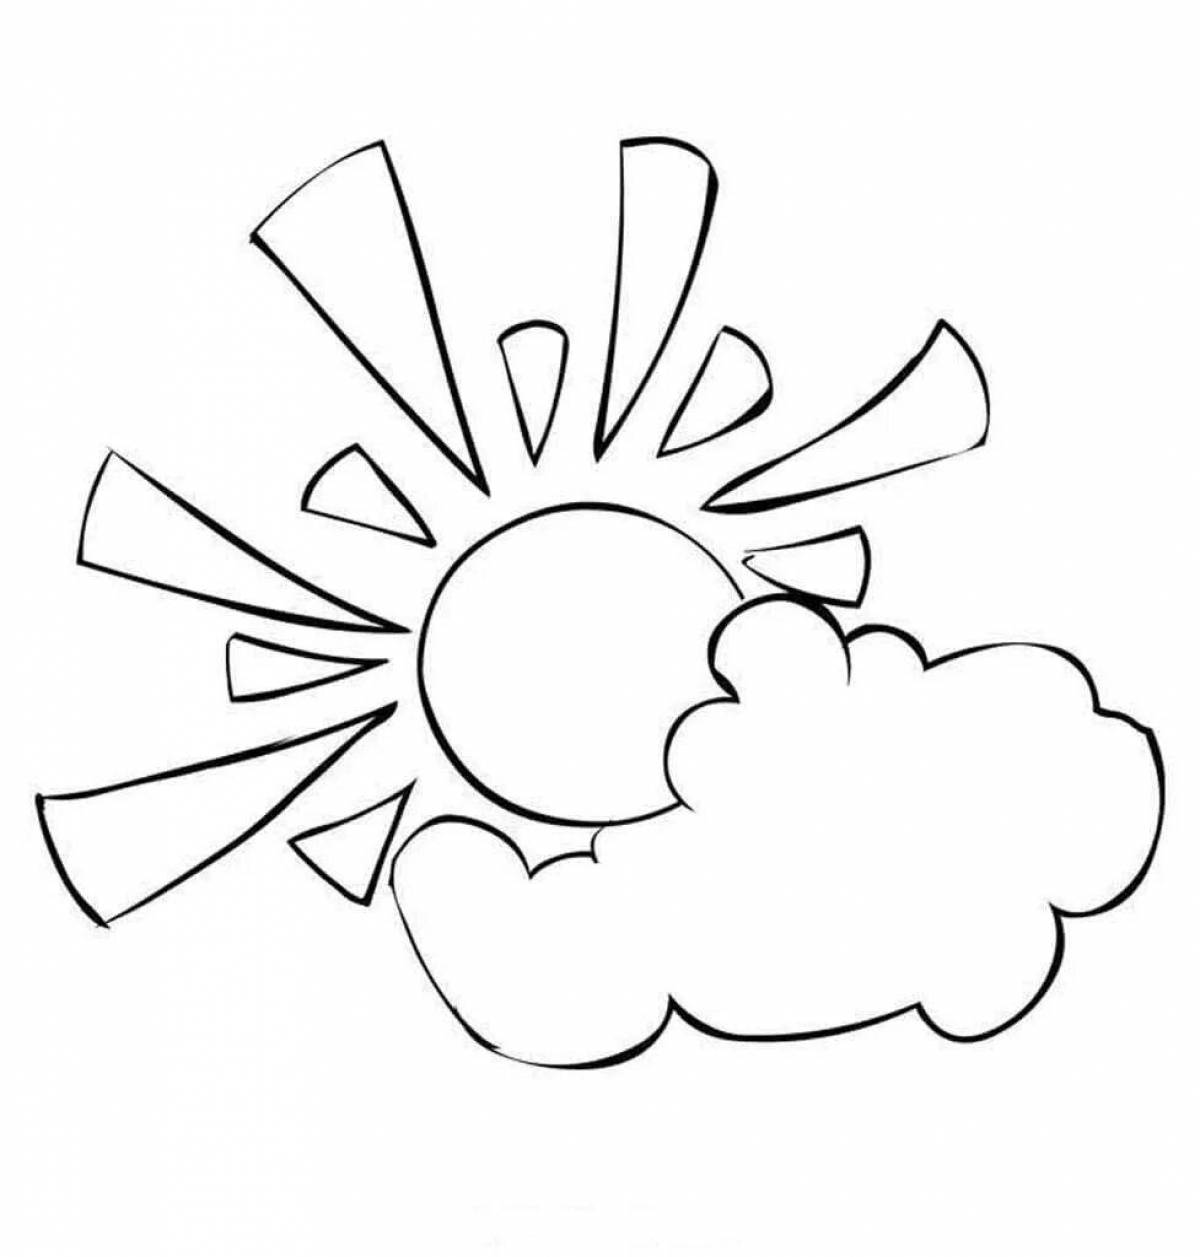 Fabulous sun coloring book for 3-4 year olds